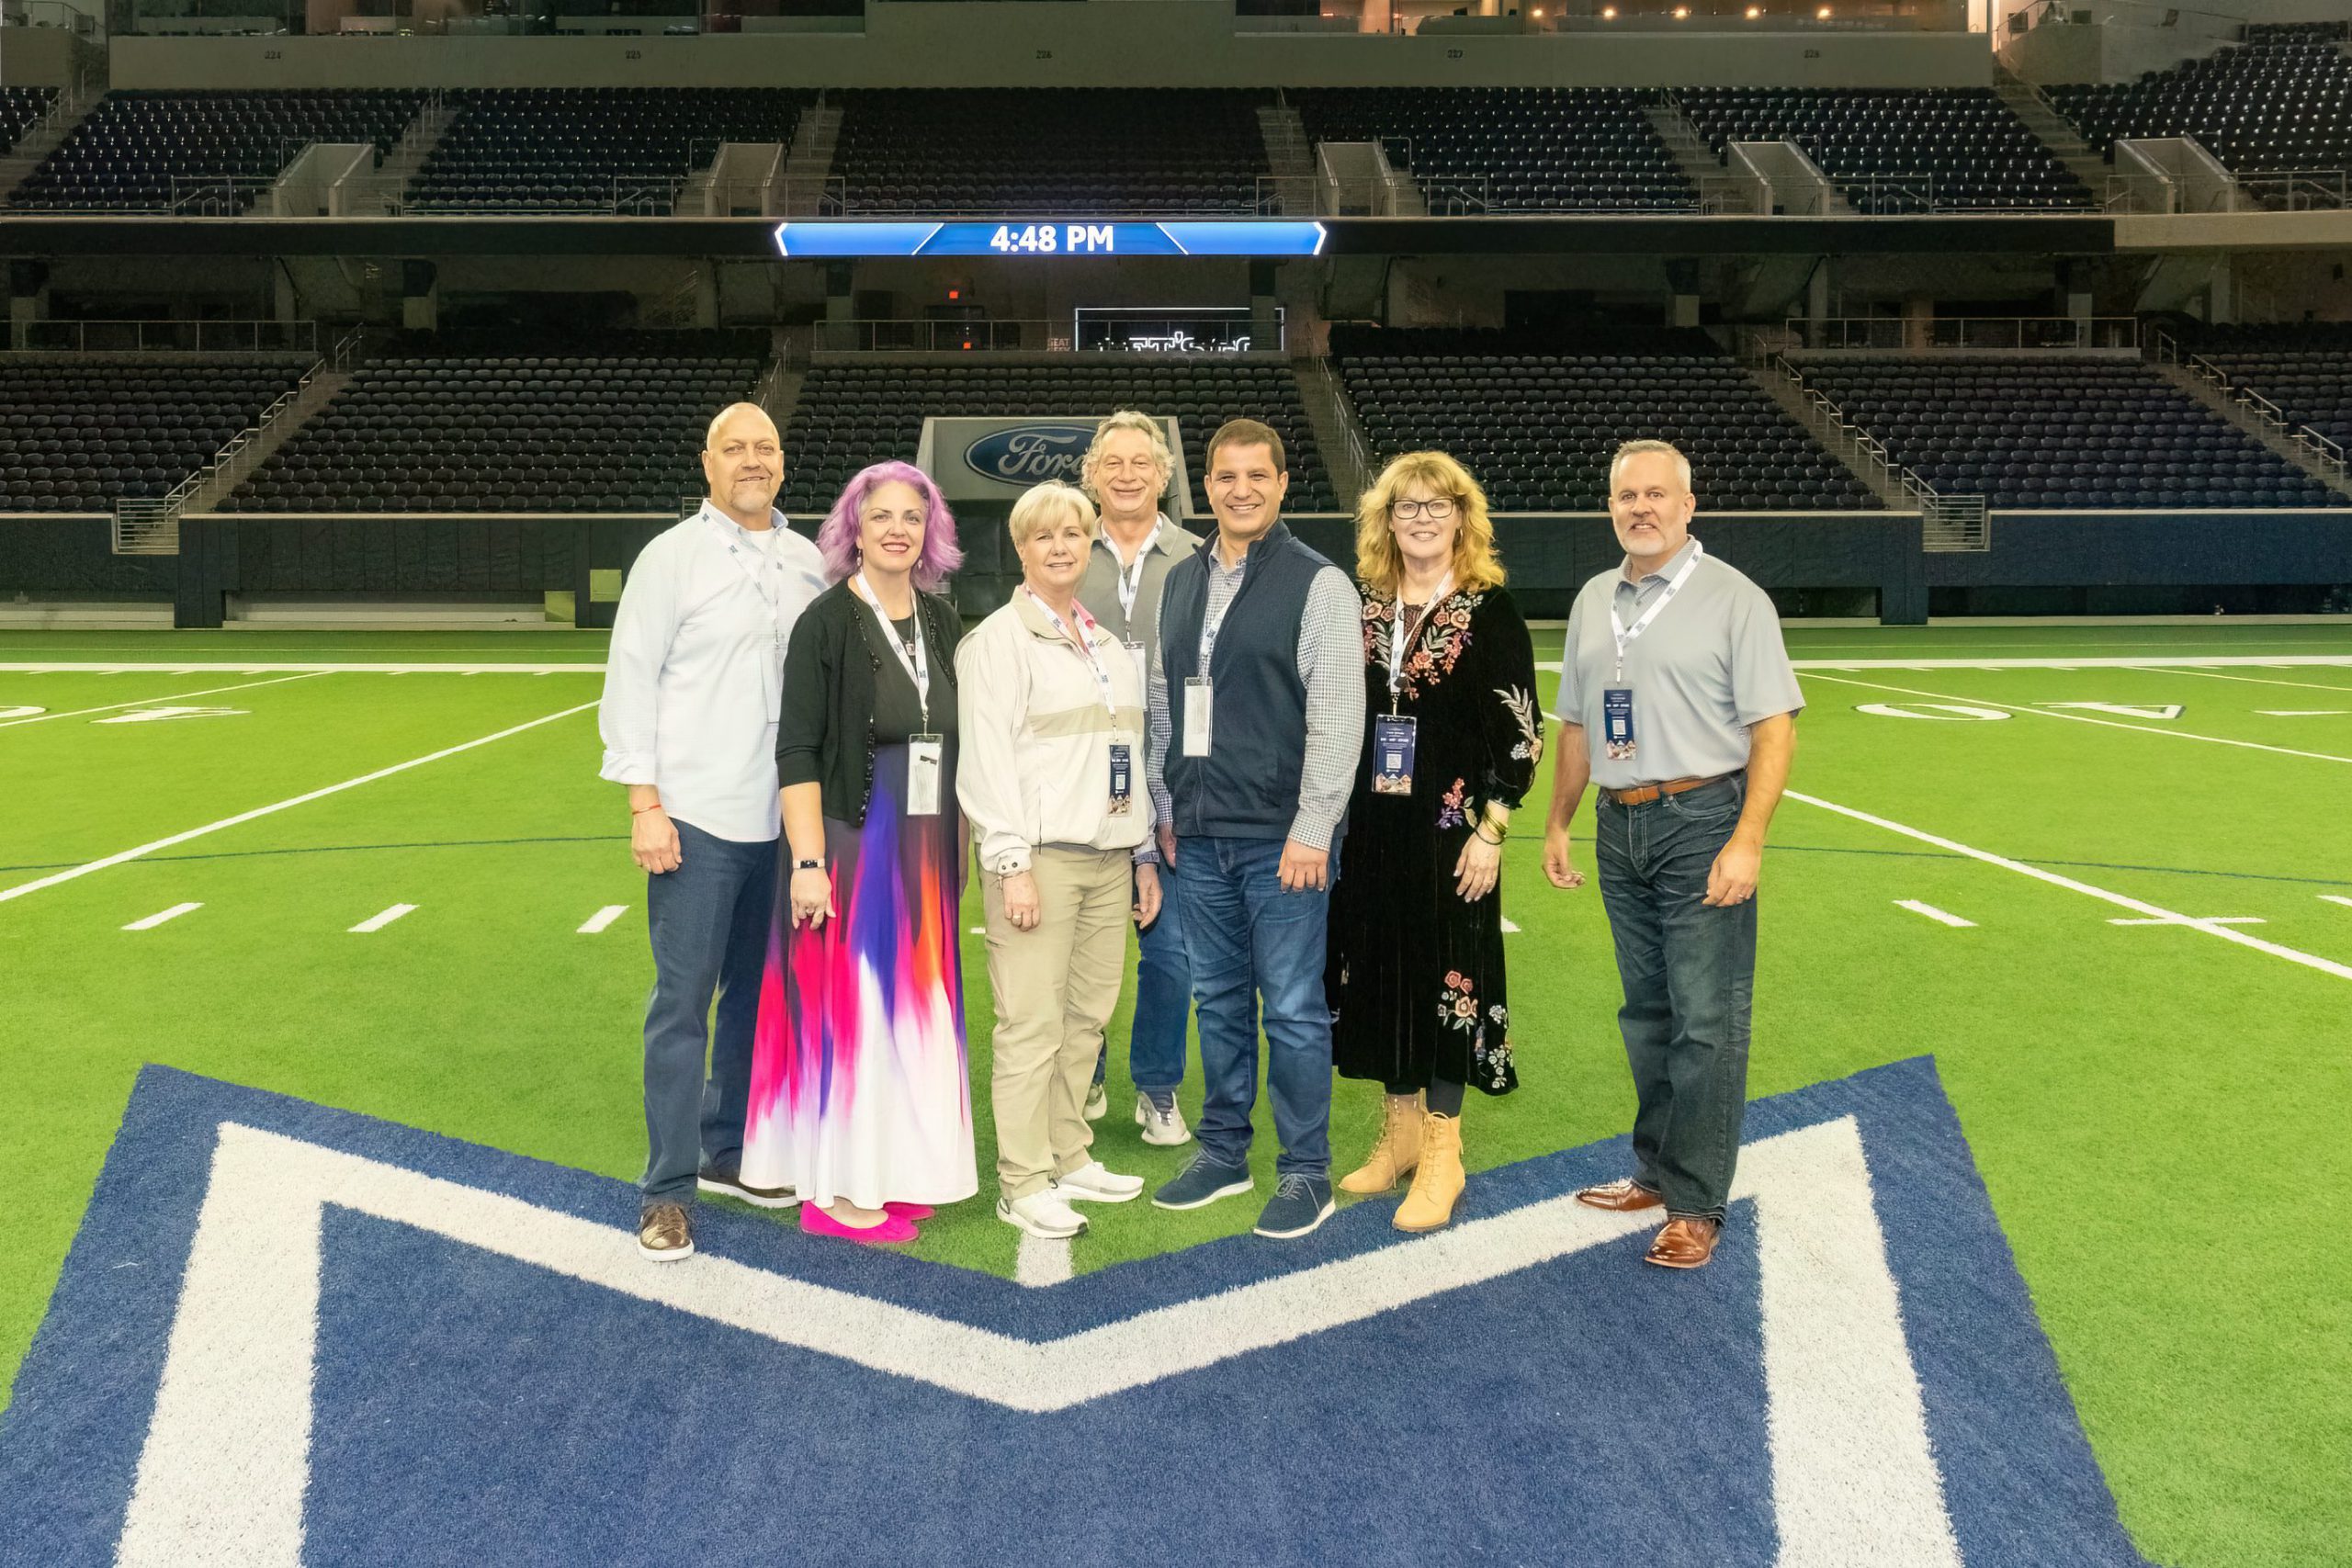 North American Insurance Services Leadership Team at The Ford Center in Frisco, Texas